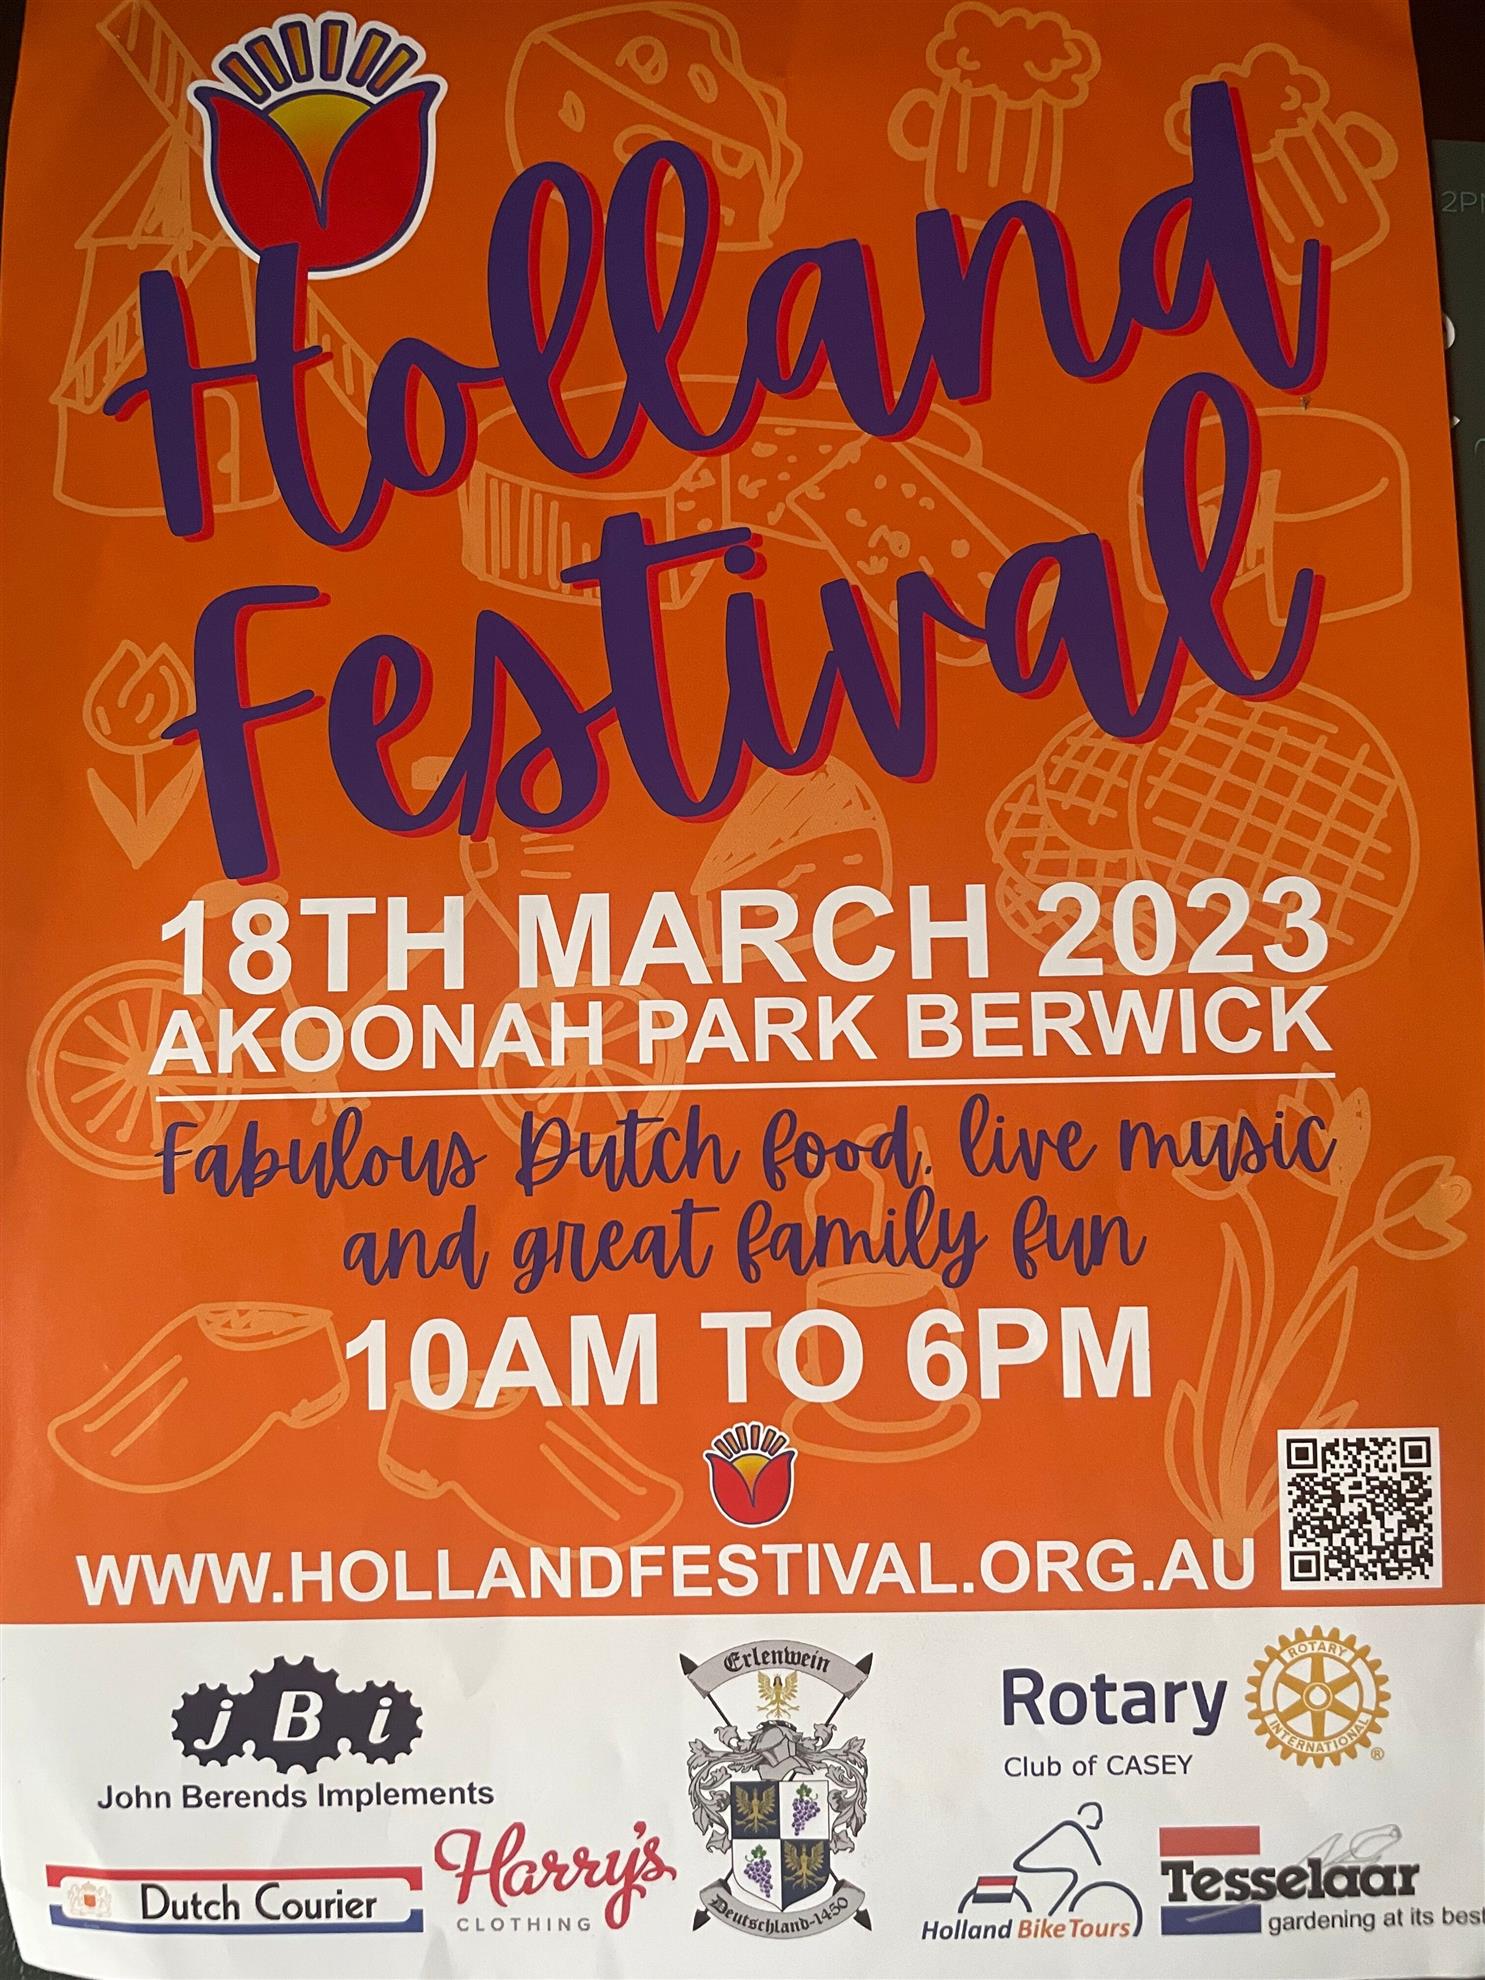 Holland Festival Rotary Club of Greater Dandenong and Endeavour Hills